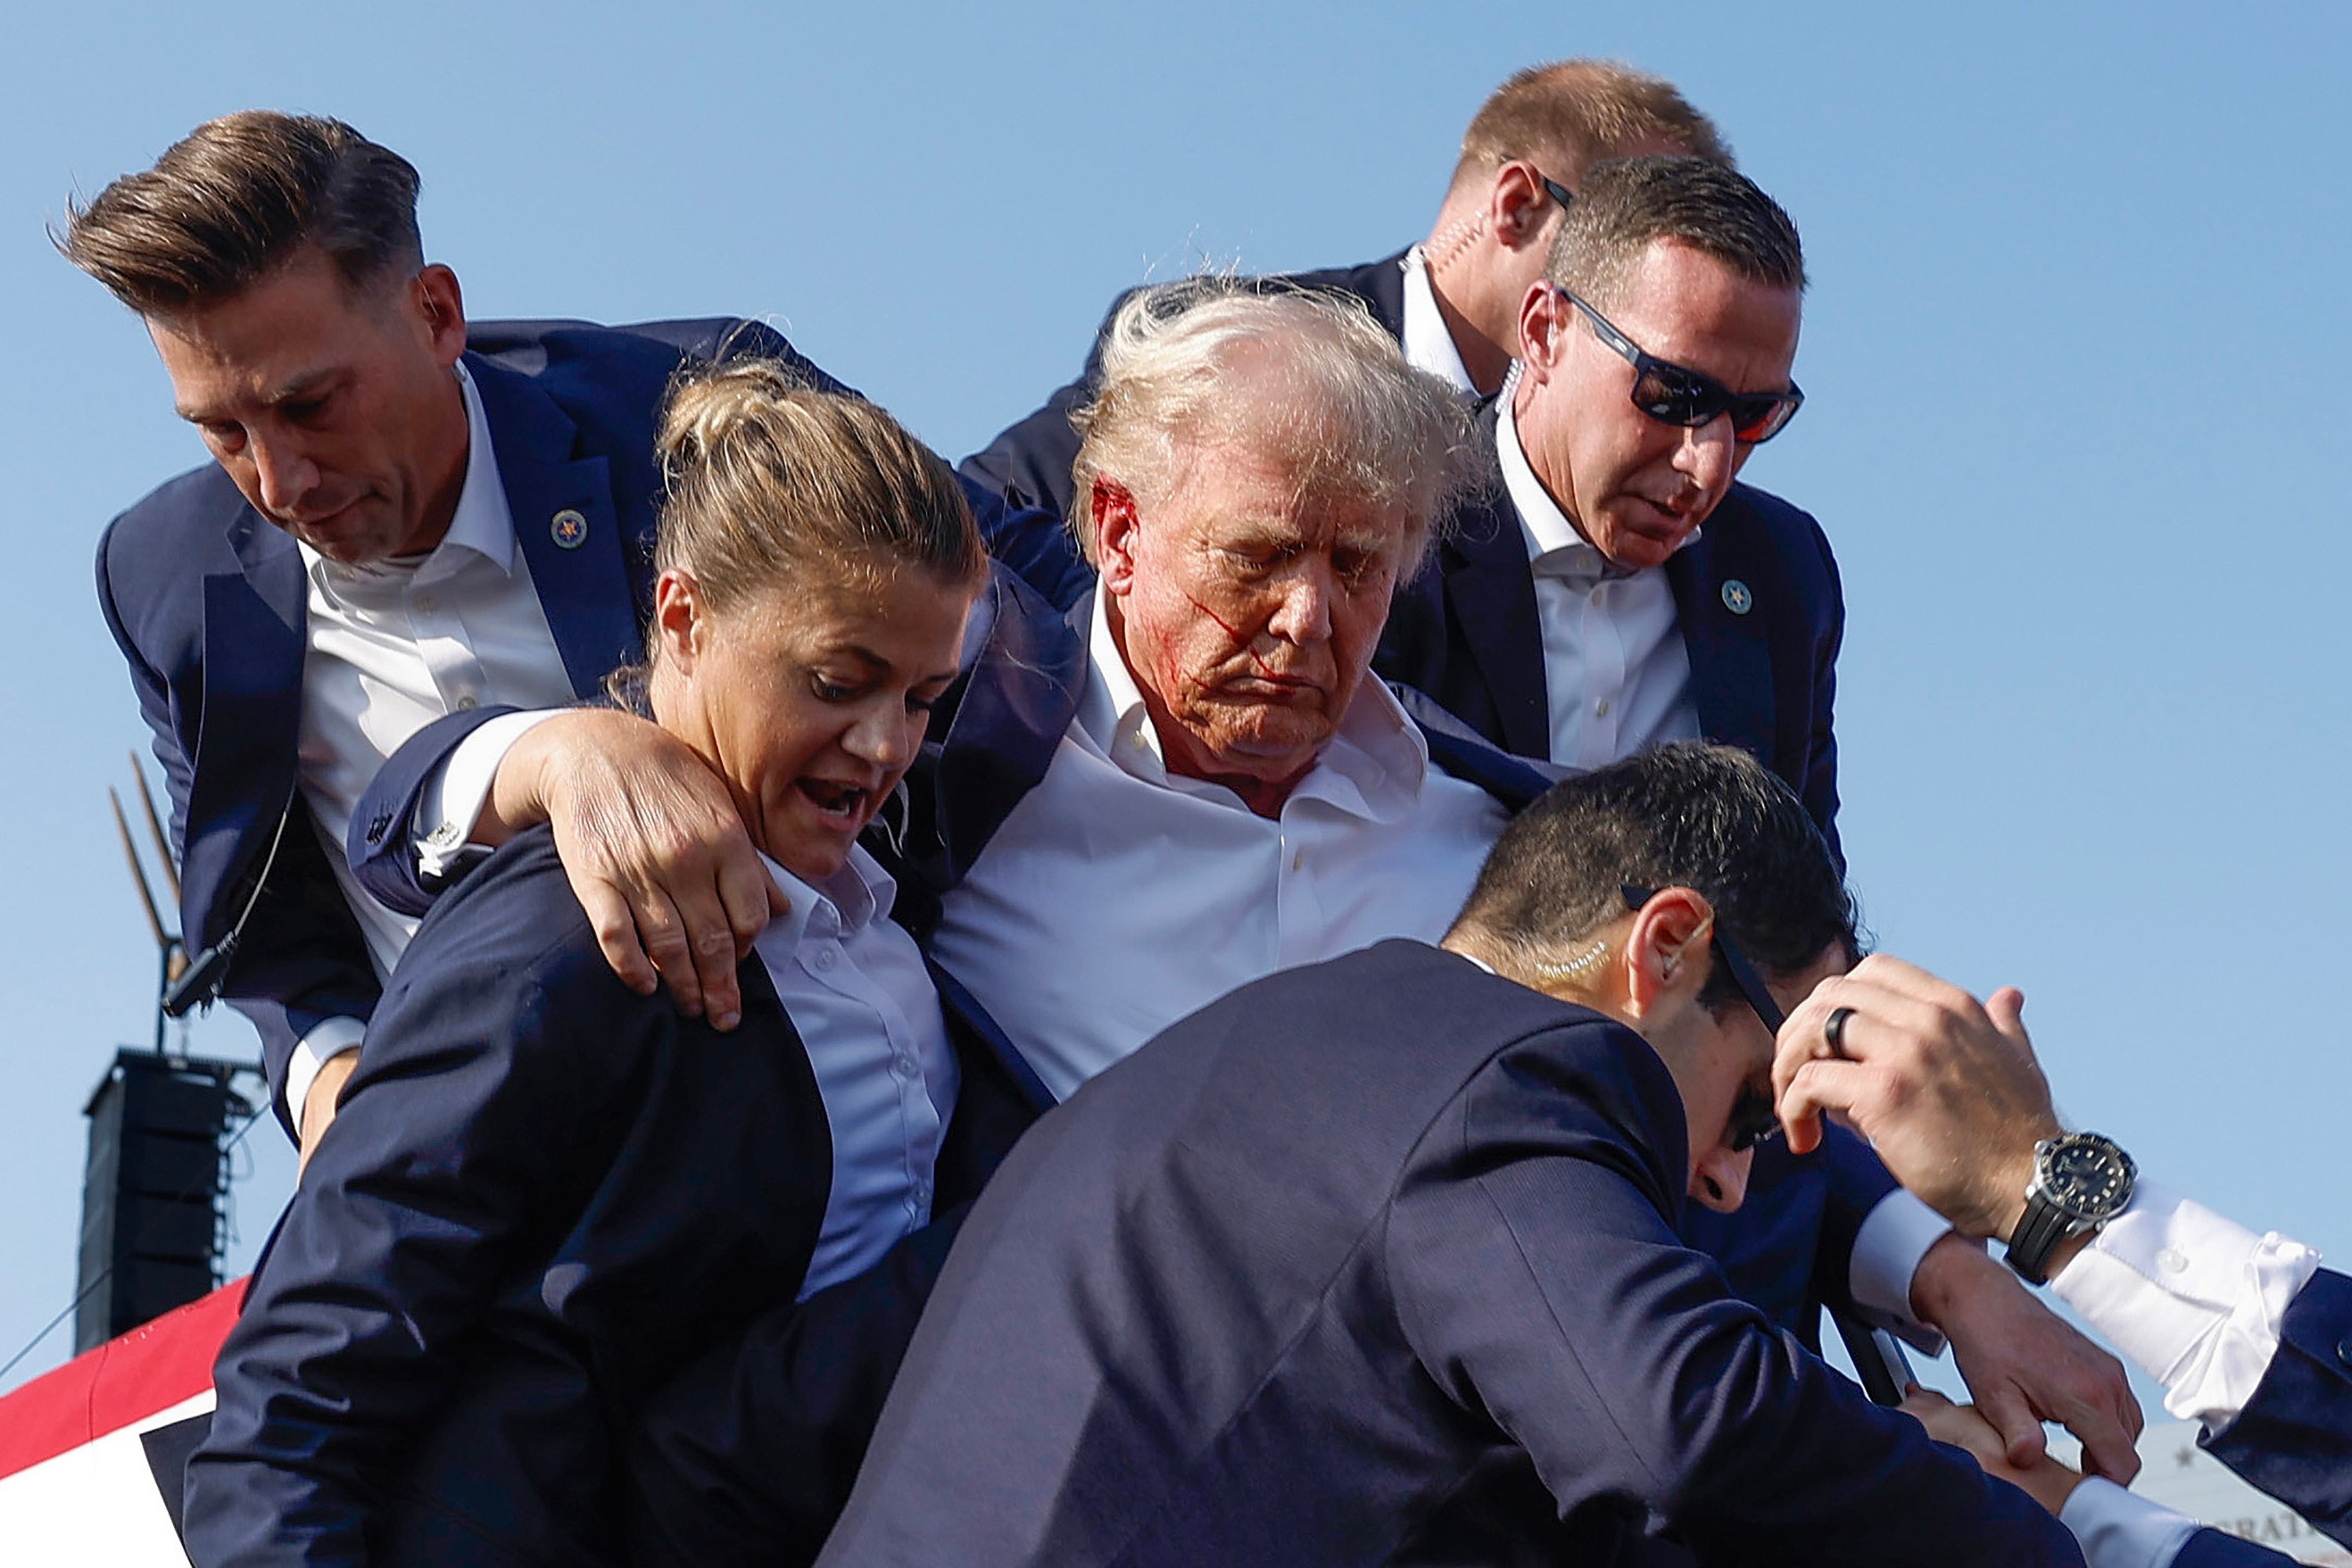 Republican presidential candidate Donald Trump is rushed offstage by United States Secret Service agents after being grazed by a bullet during a failed assassination attempt in Butler, Pennsylvania, on July 13, 2024. Photo: Anna Moneymaker/Getty Images/TNS